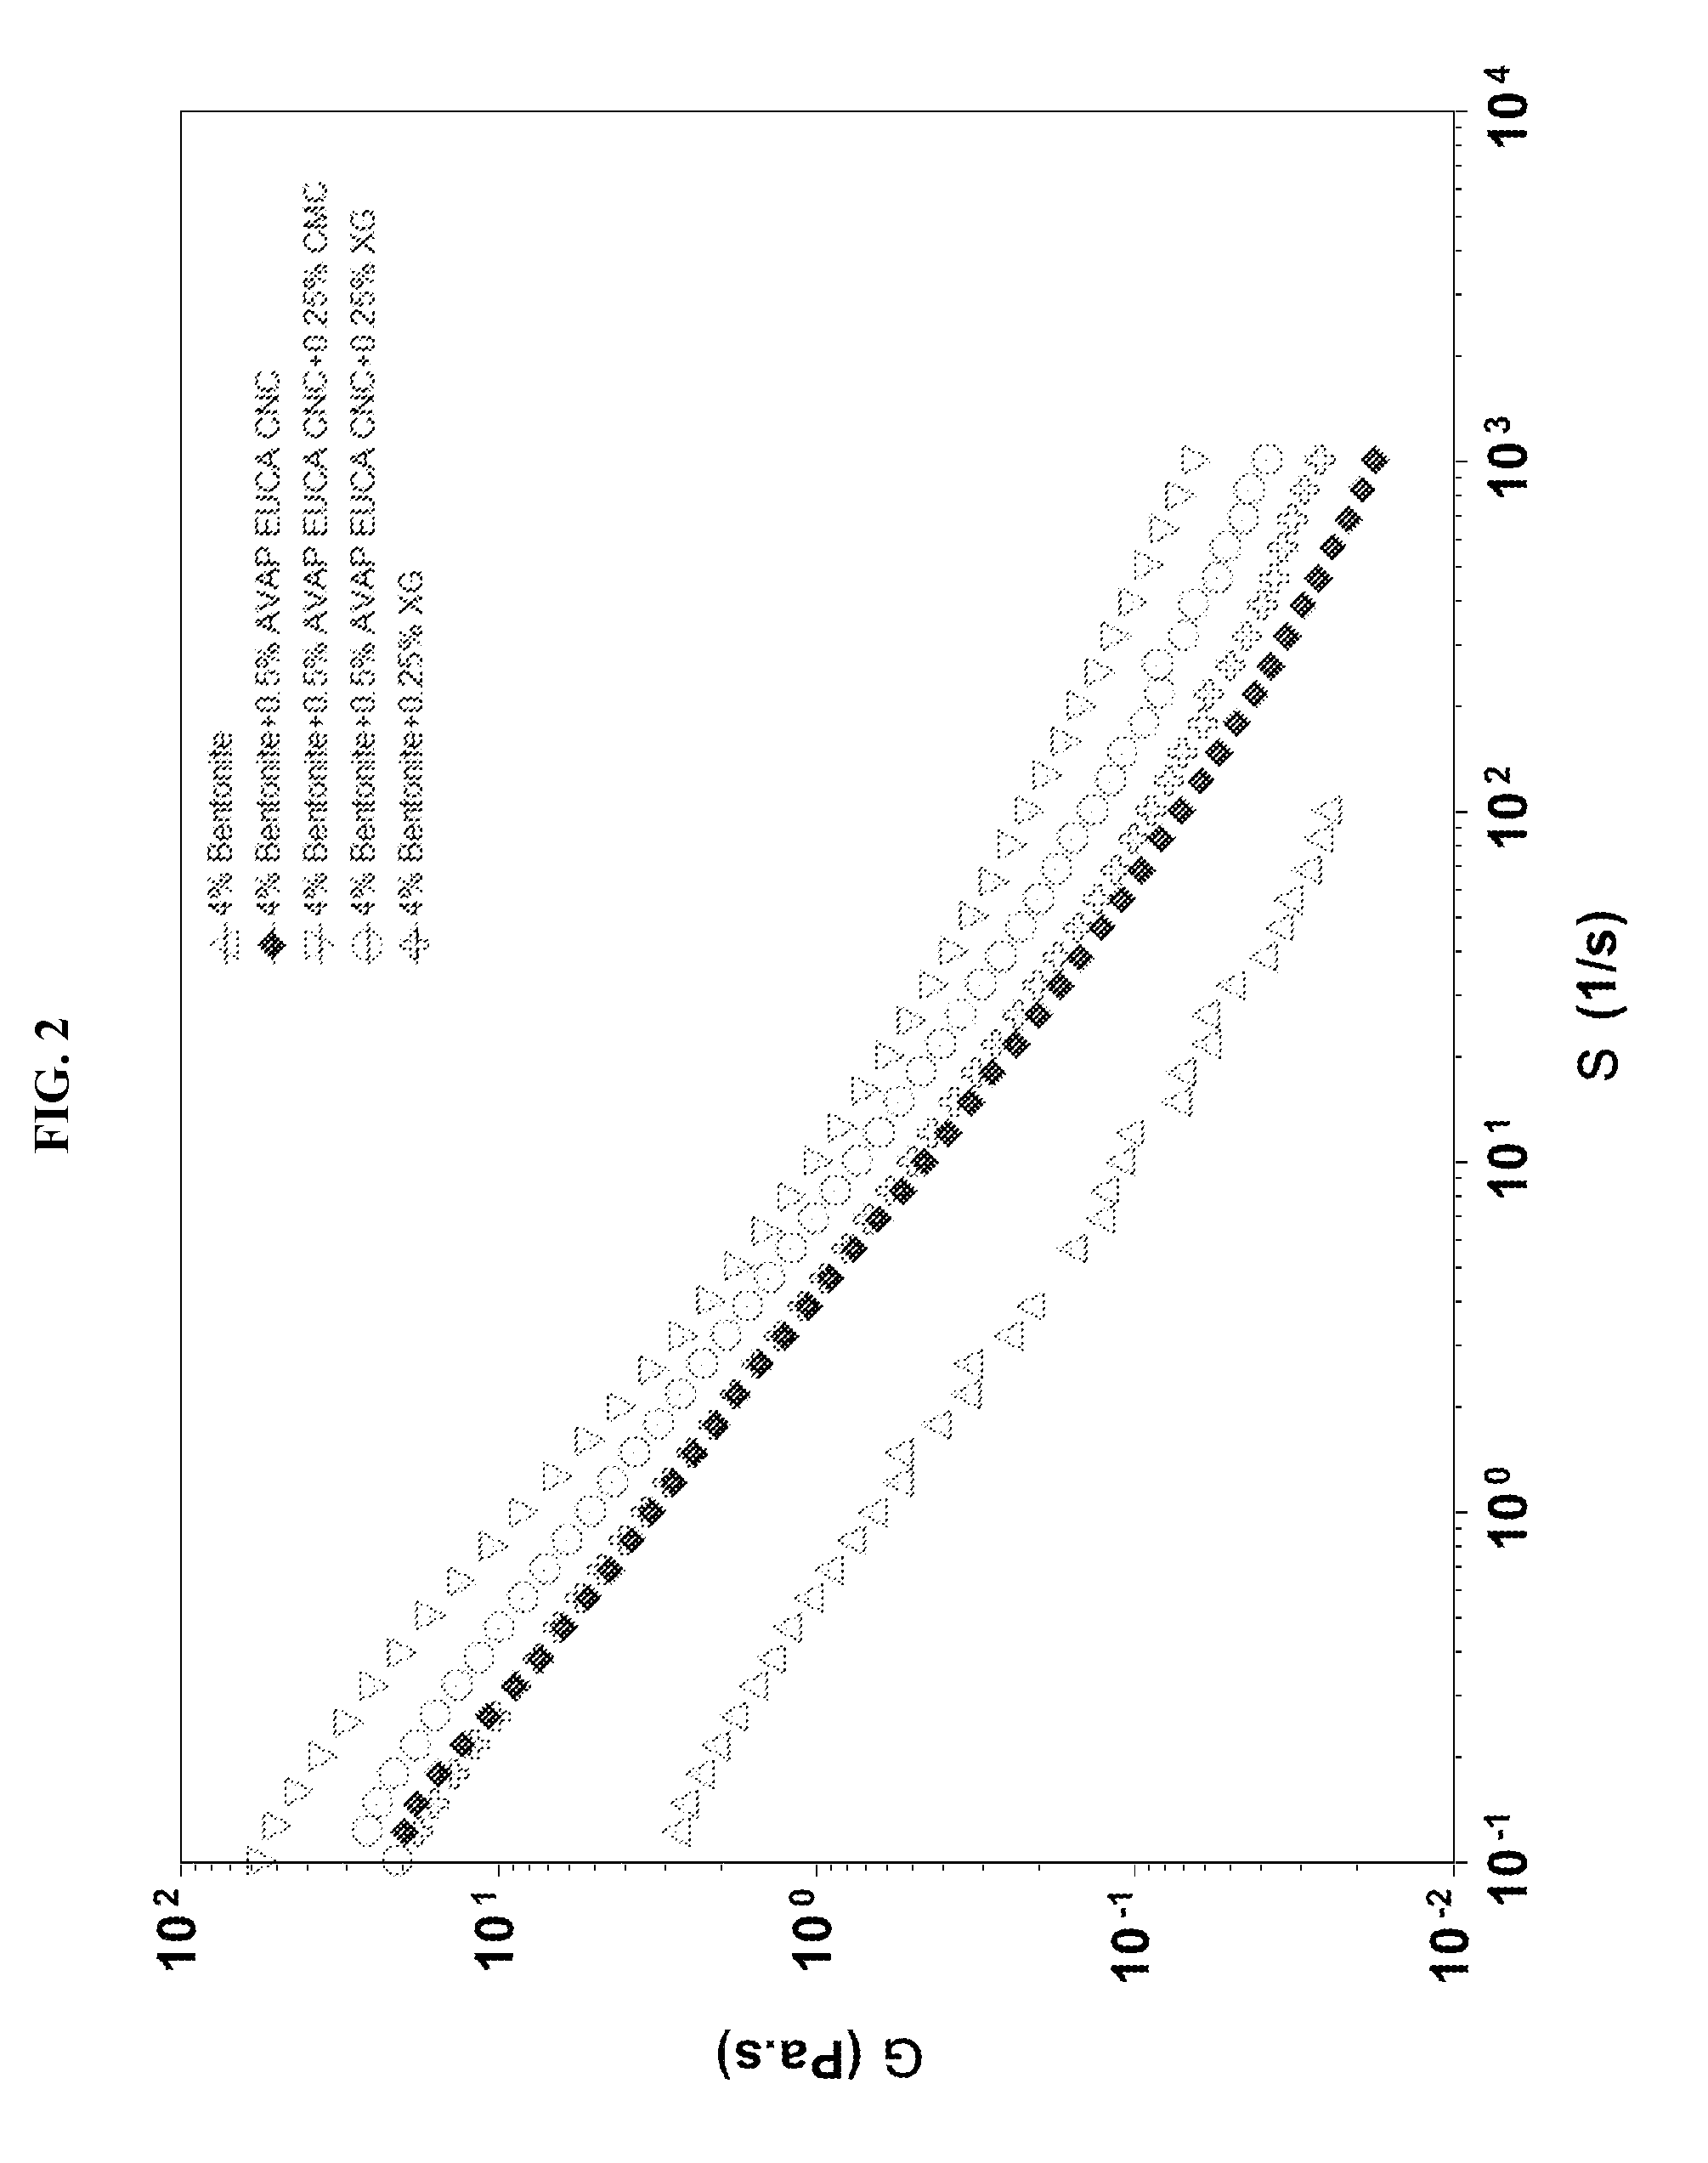 Drilling fluid additives and fracturing fluid additives containing cellulose nanofibers and/or nanocrystals